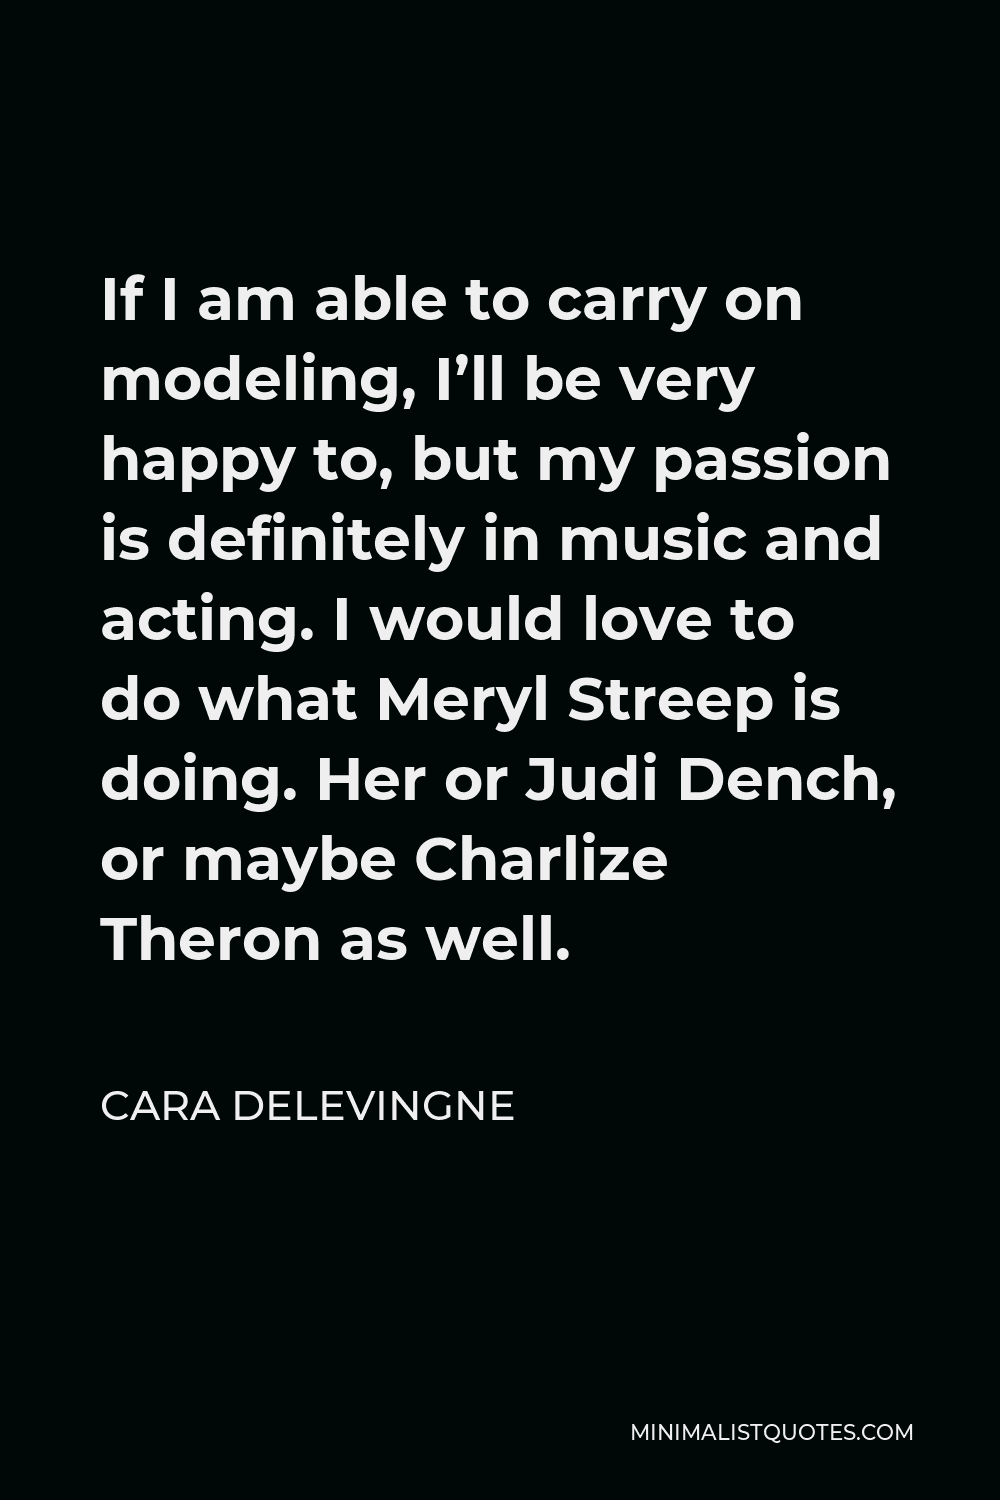 Cara Delevingne Quote - If I am able to carry on modeling, I’ll be very happy to, but my passion is definitely in music and acting. I would love to do what Meryl Streep is doing. Her or Judi Dench, or maybe Charlize Theron as well.